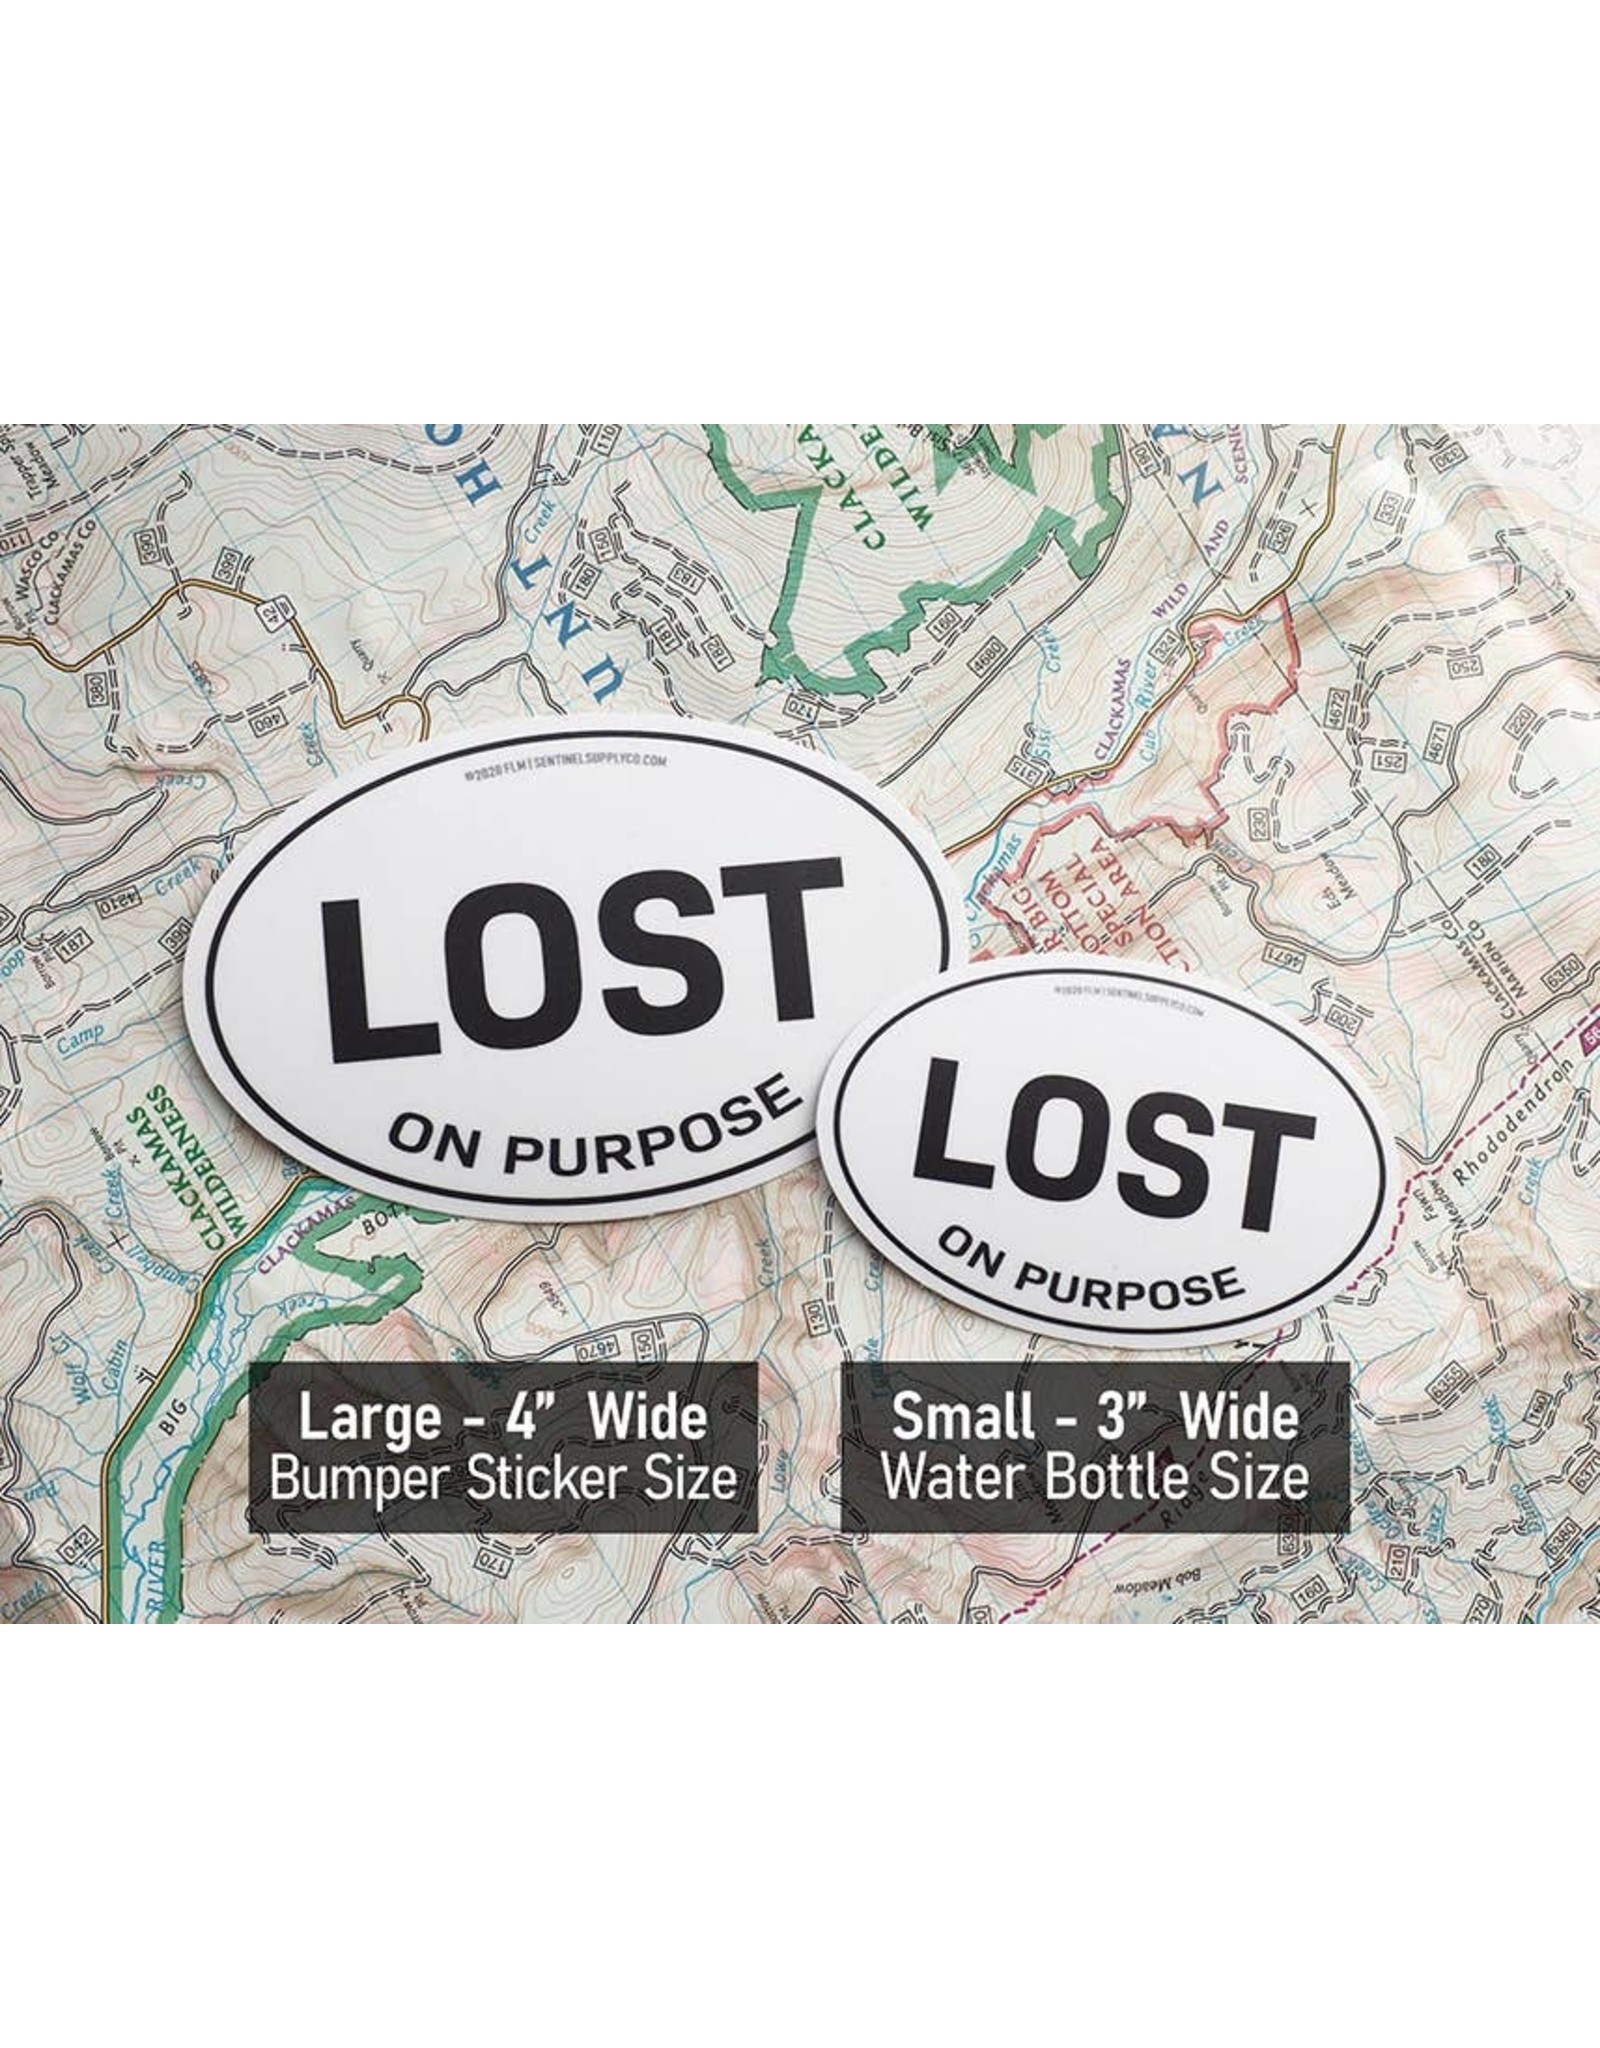 Sentinal Supply Lost on Purpose Oval Bumper Sticker, Outdoor Adventure Decal  Sm. Water Bottle Size - 3"